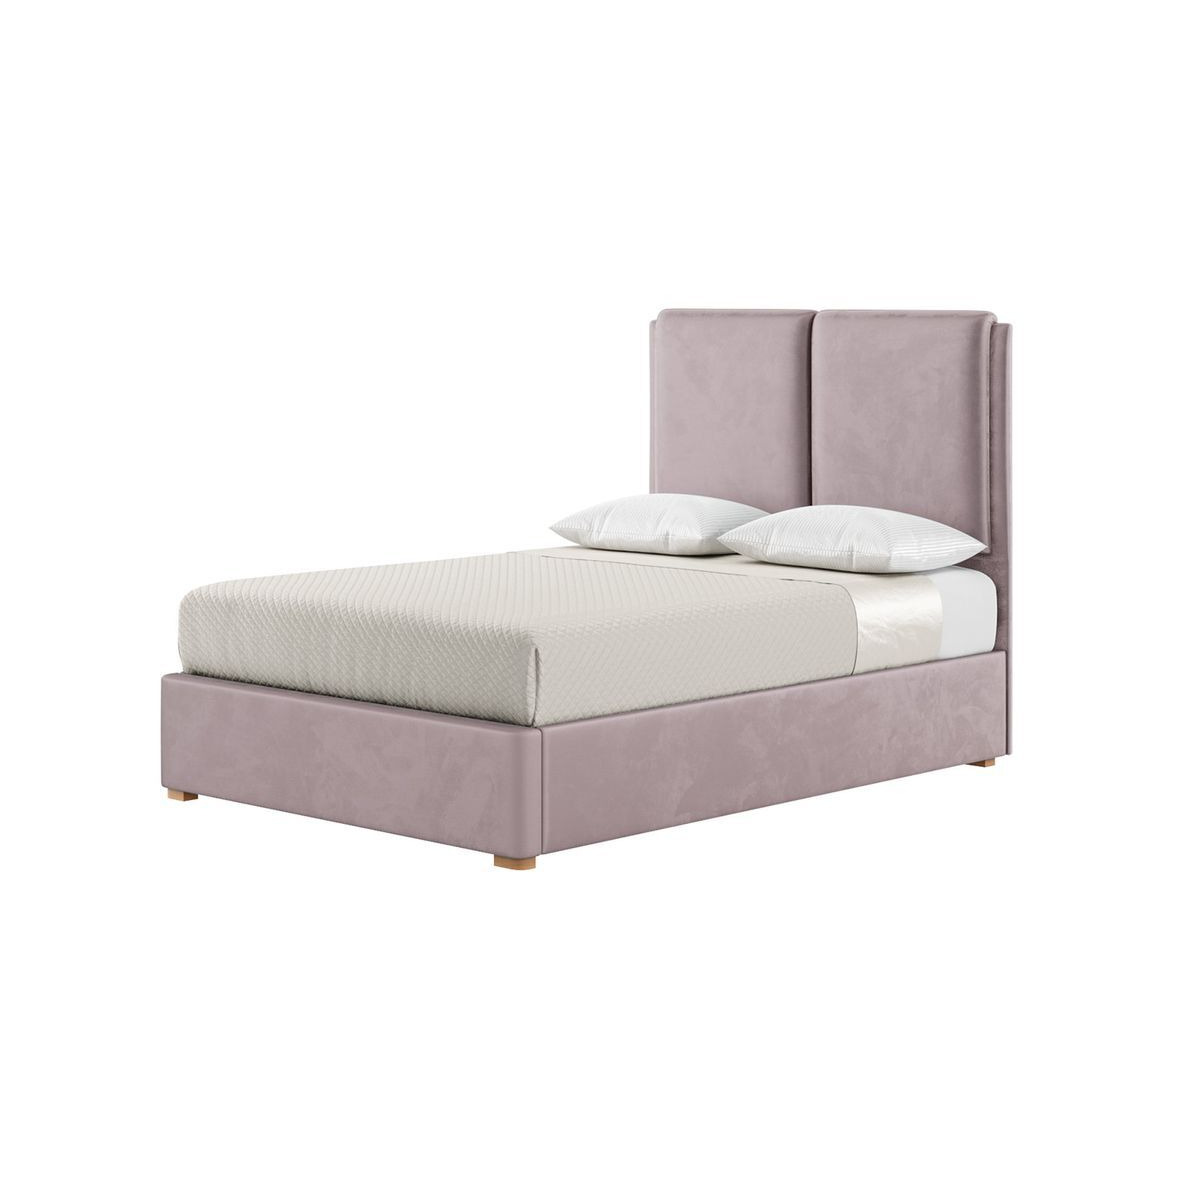 Felix 4ft6 Double Bed Frame With Contemporary Twin Panel Headboard, lilac, Leg colour: like oak - image 1